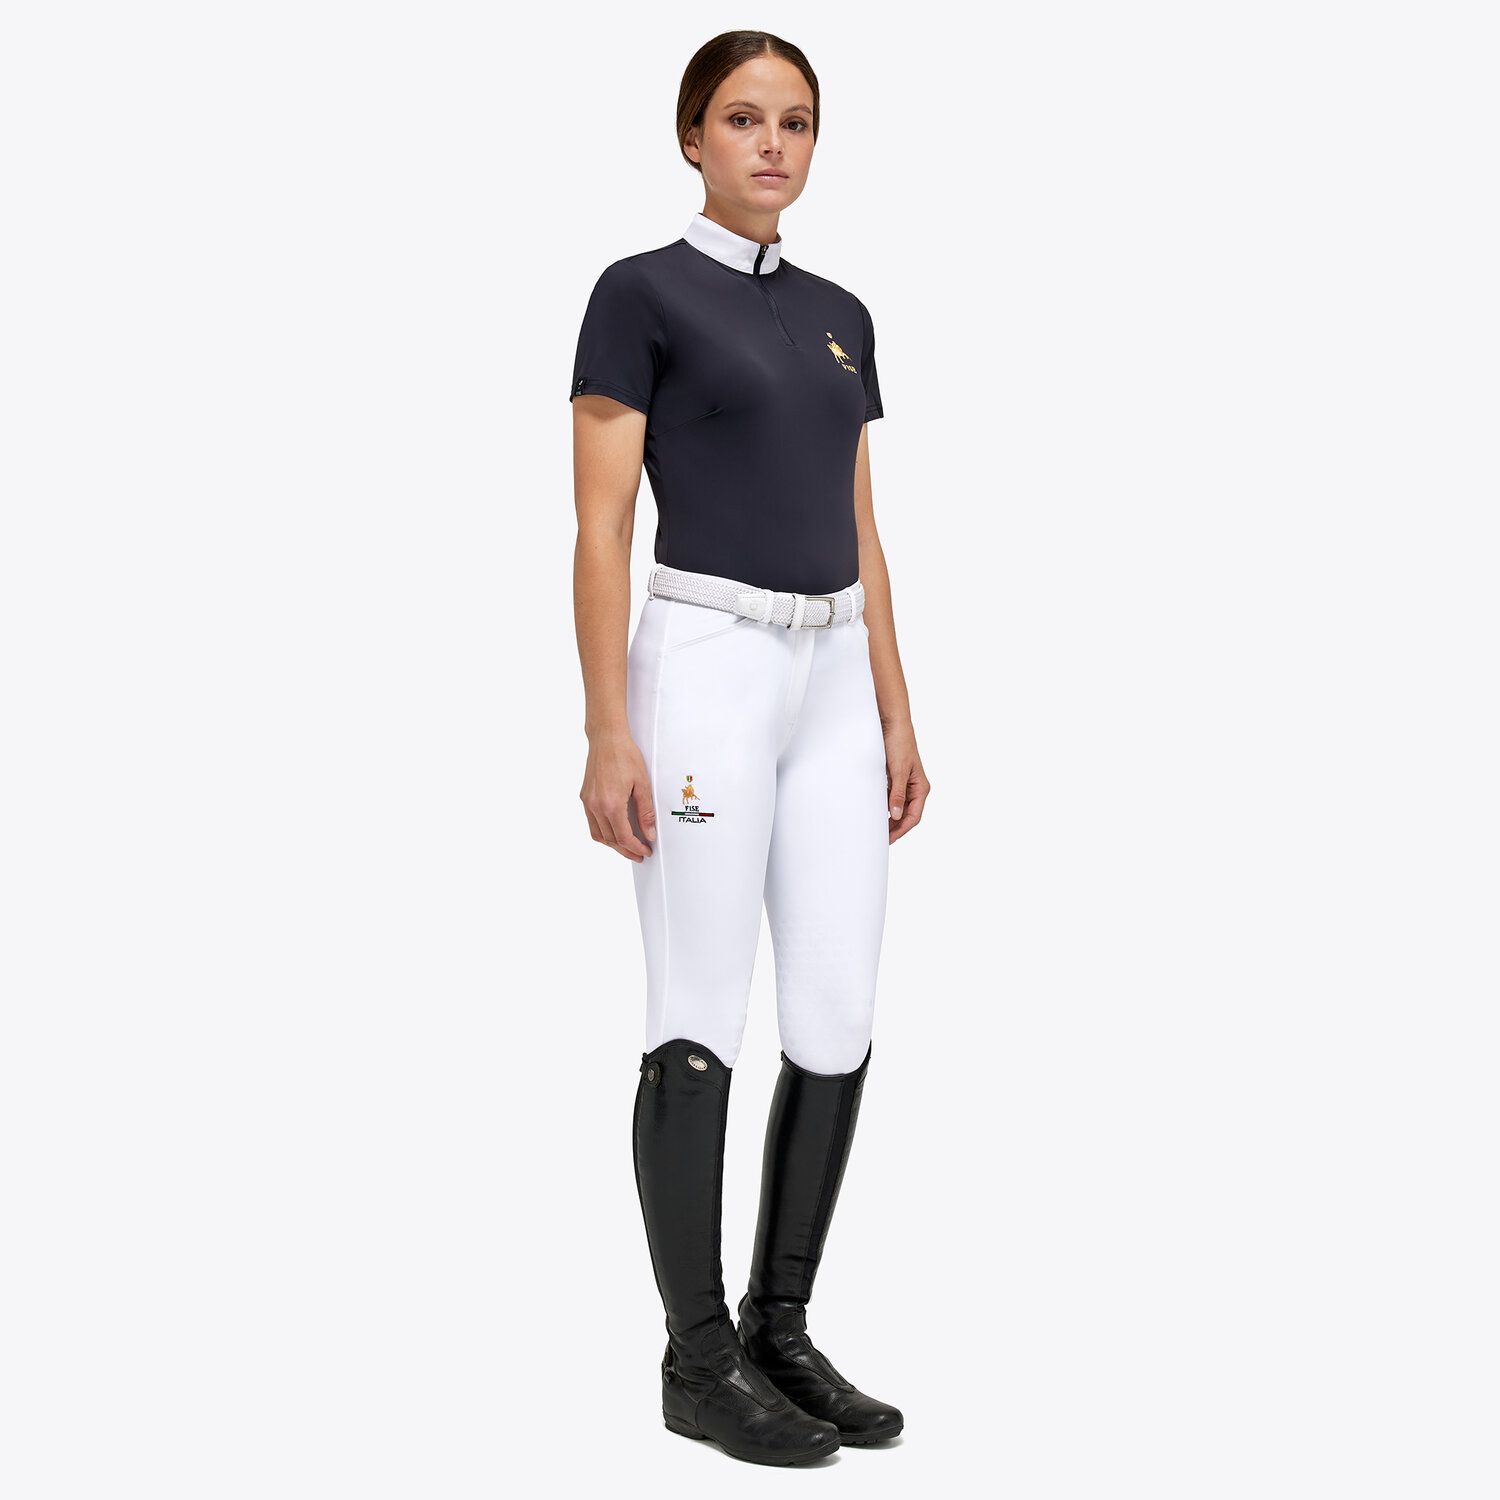 Cavalleria Toscana Women's Fise competition Polo NAVY-2